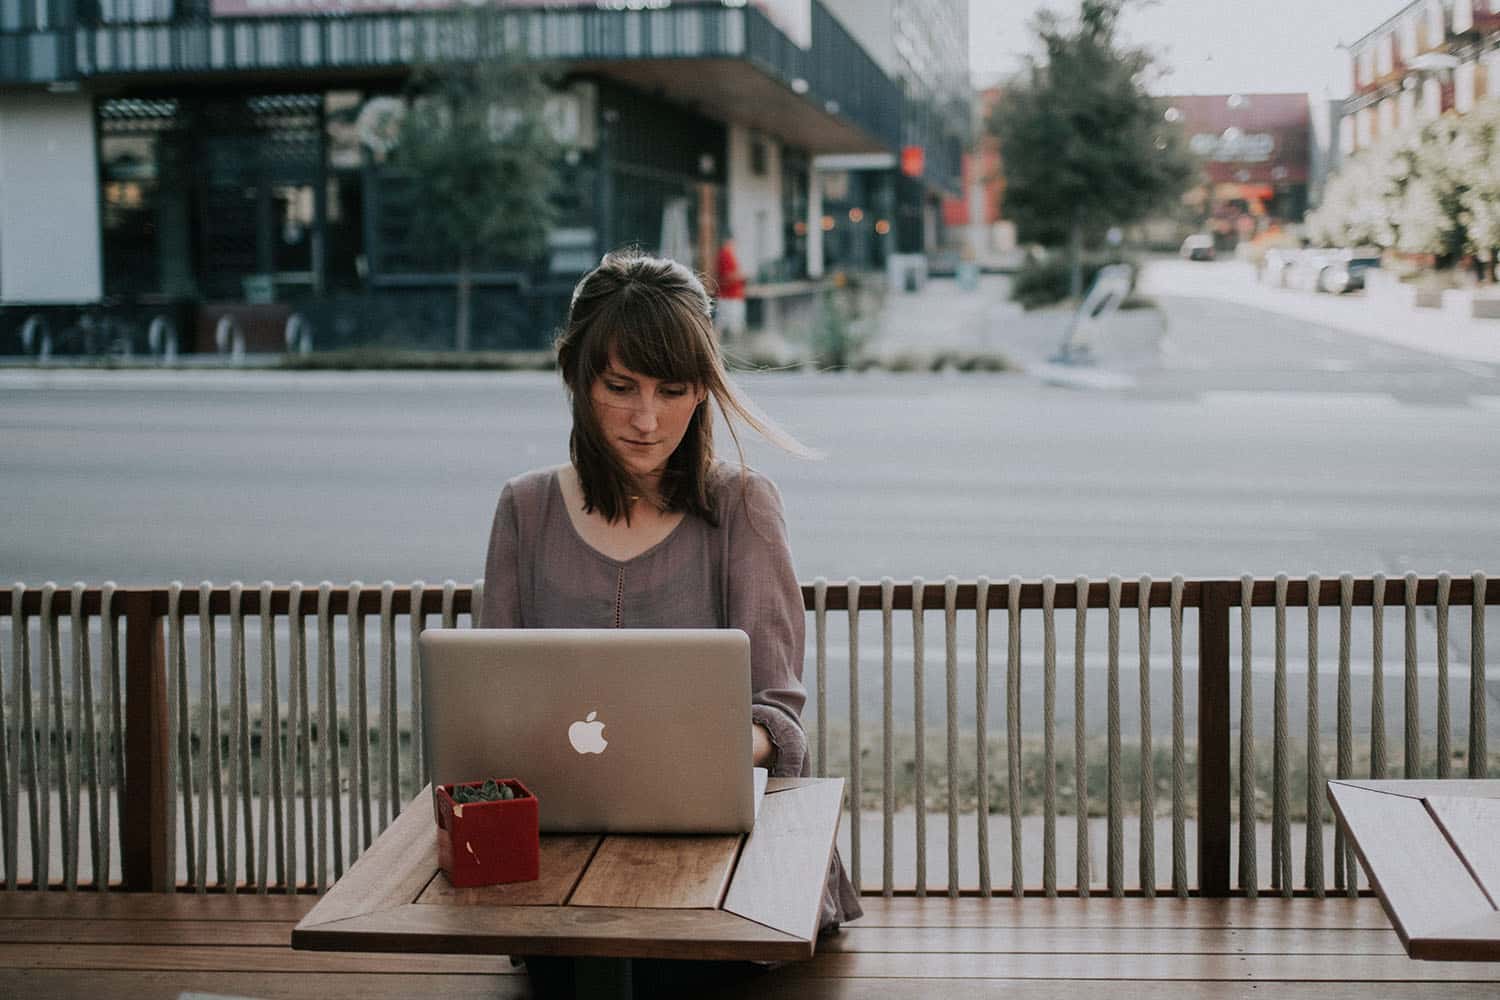 Image of a woman using her laptop while sitting on a table outside.